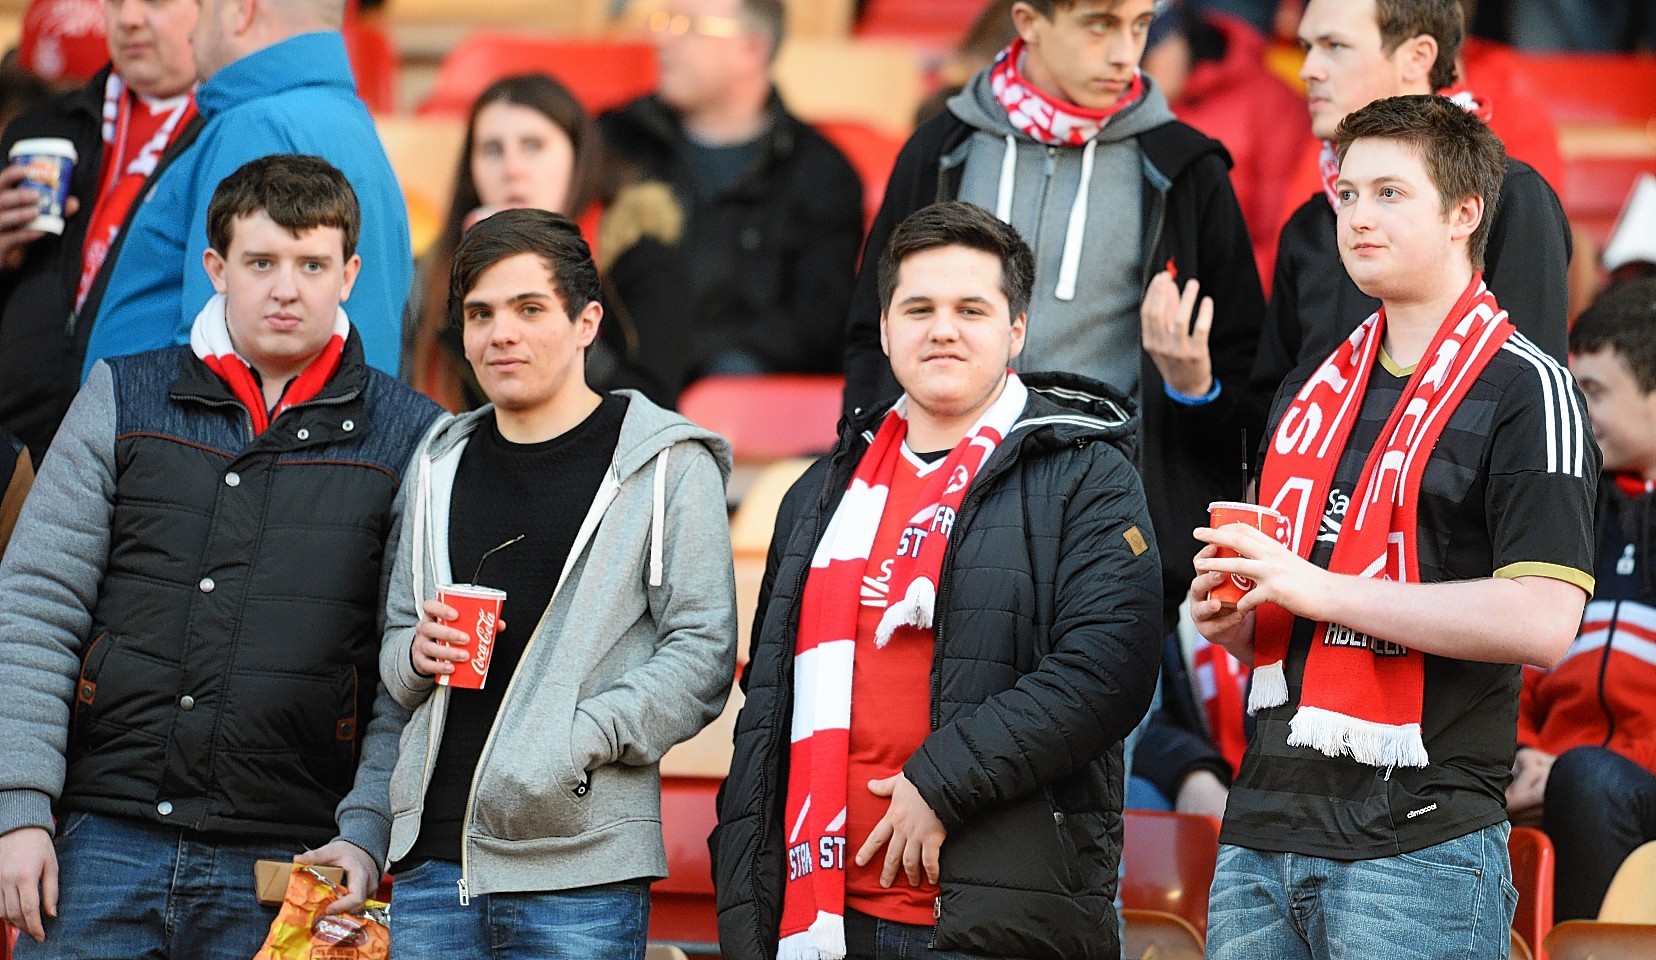 The Dons support at Pittodrie this evening were treated to another three points